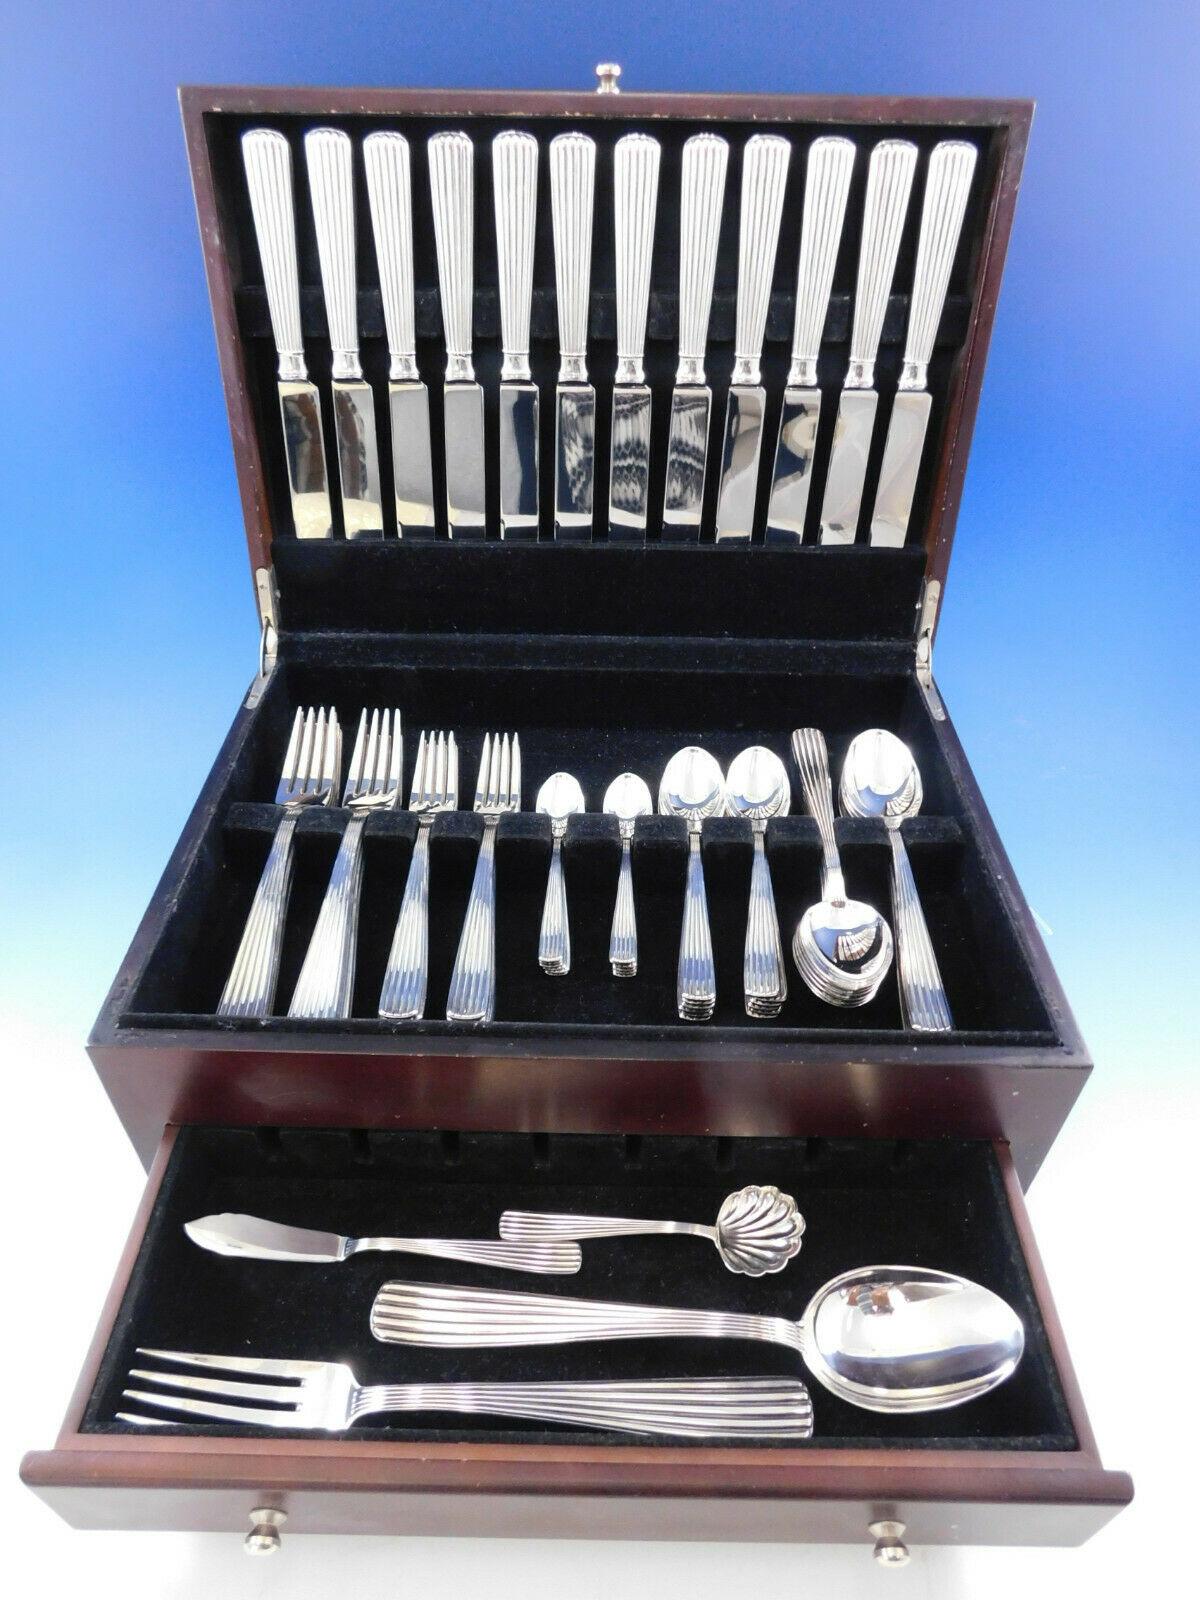 Continental size America by Fina Italy sterling silver flatware set, 76 pieces. This set includes:

12 continental size knives, 9 3/4